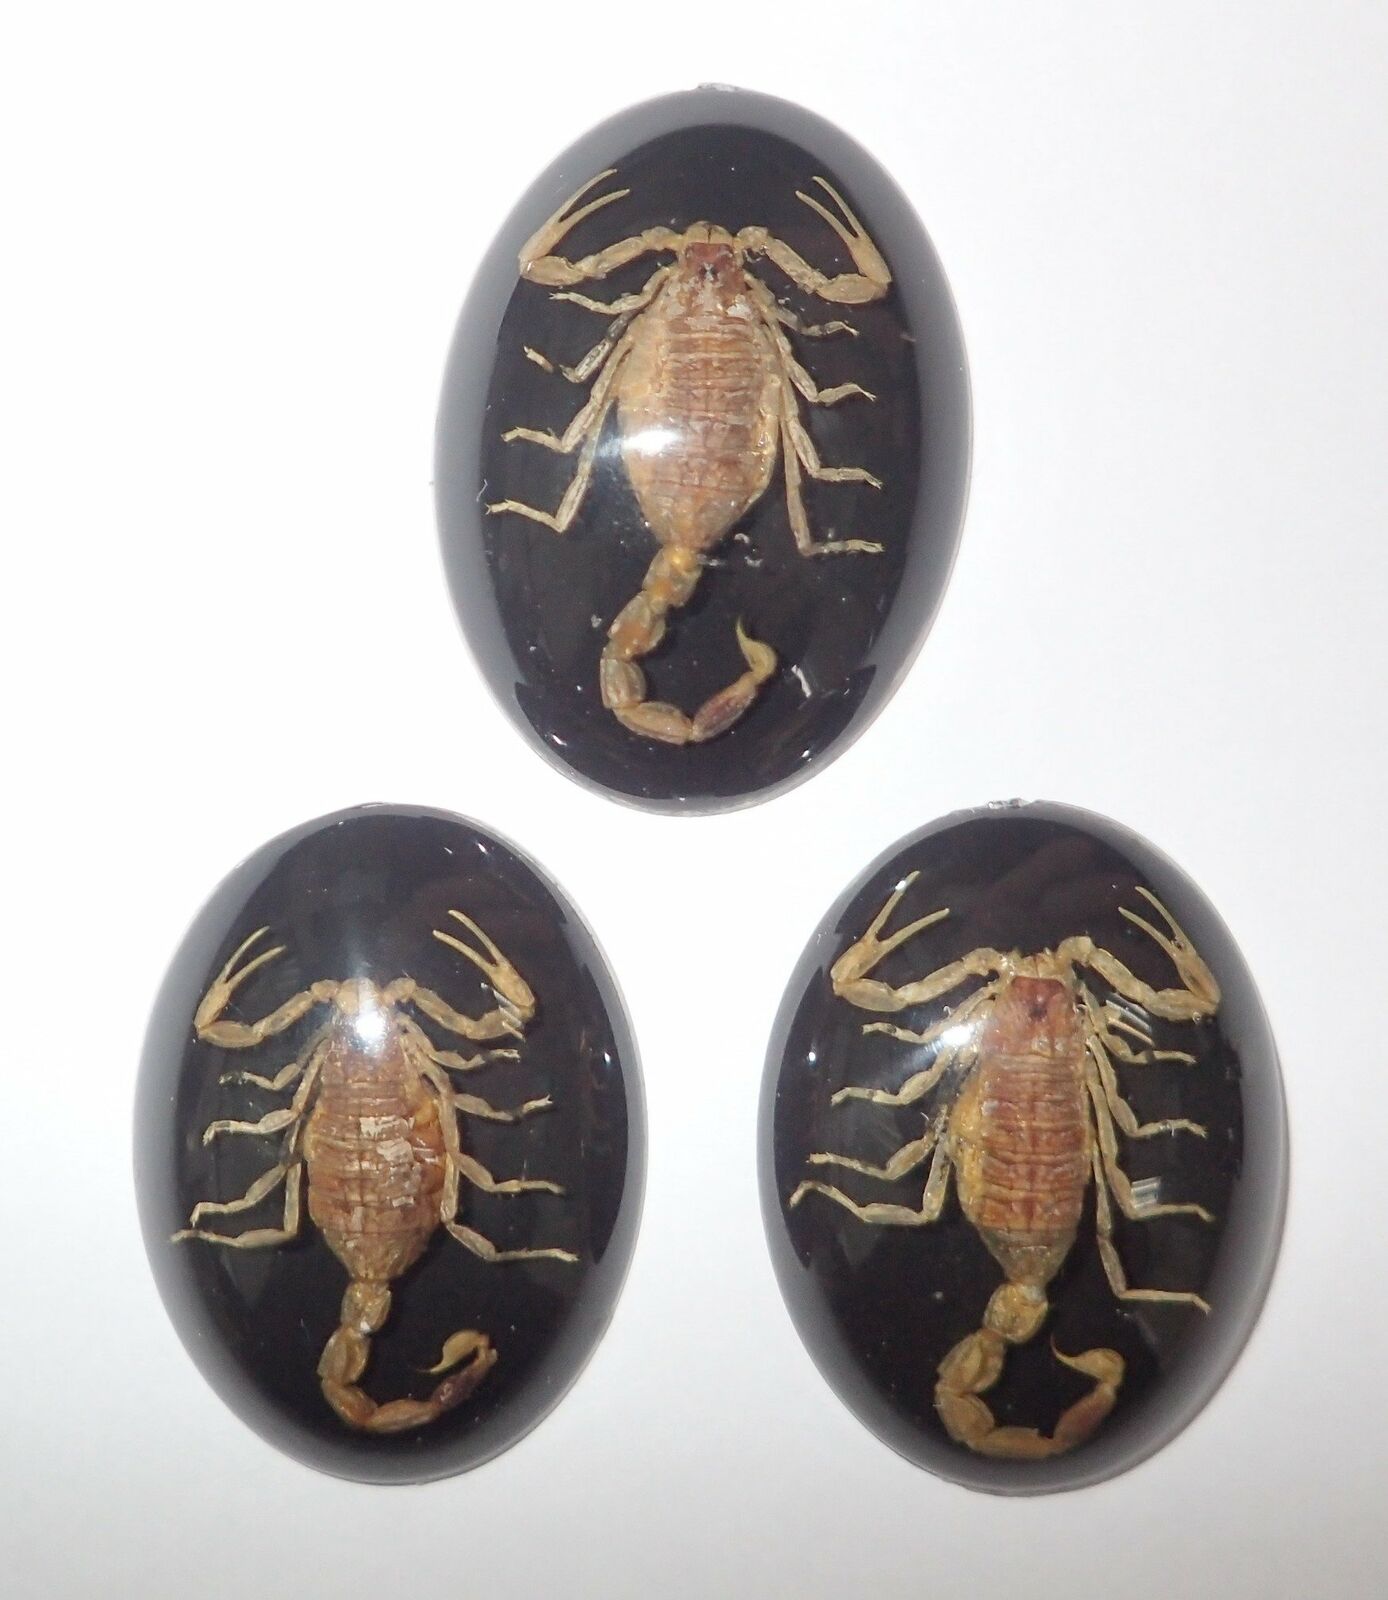 Insect Cabochon Golden Scorpion Oval 30x40 mm on Black bottom 3 pieces Lot